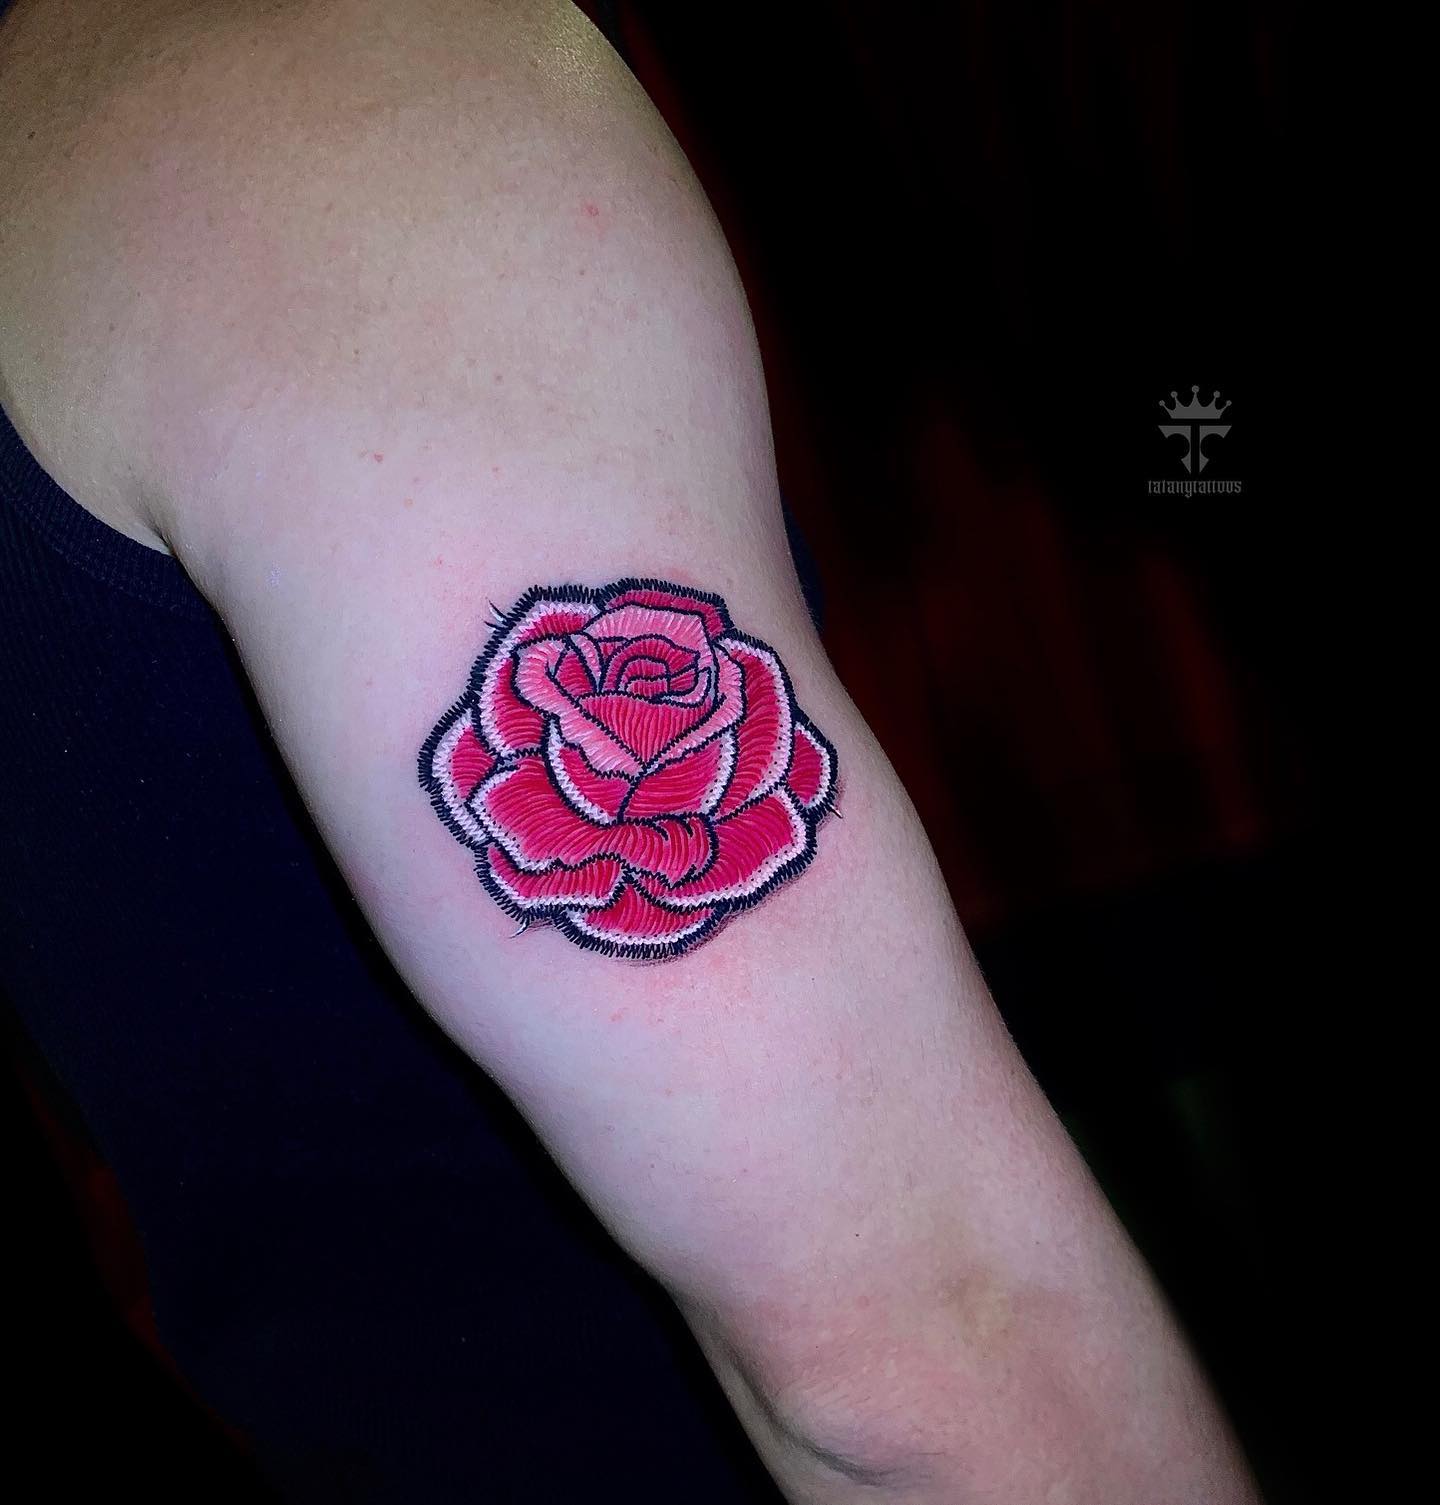 Simple rose tattoo in embroidery technique 